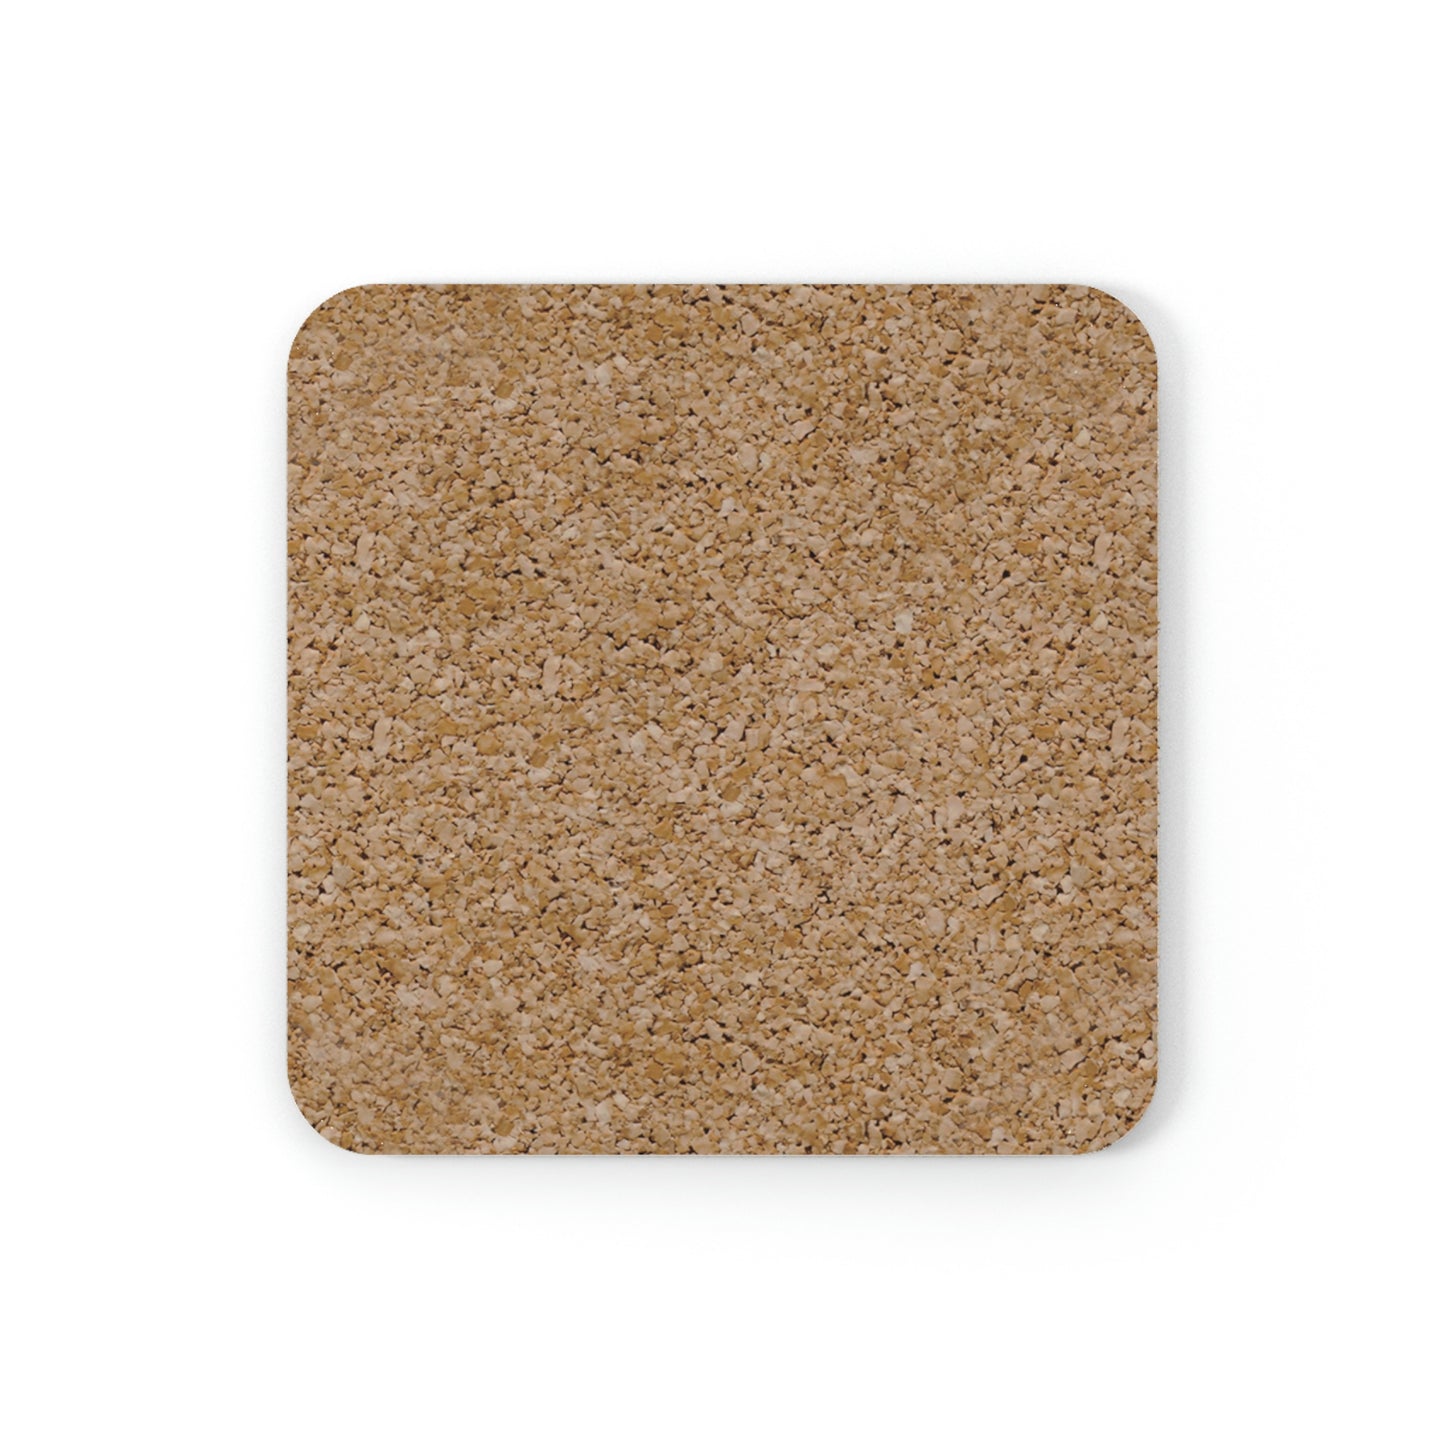 Stay Golden My Friends Cork Back Coaster (Blue/Green Ombre)